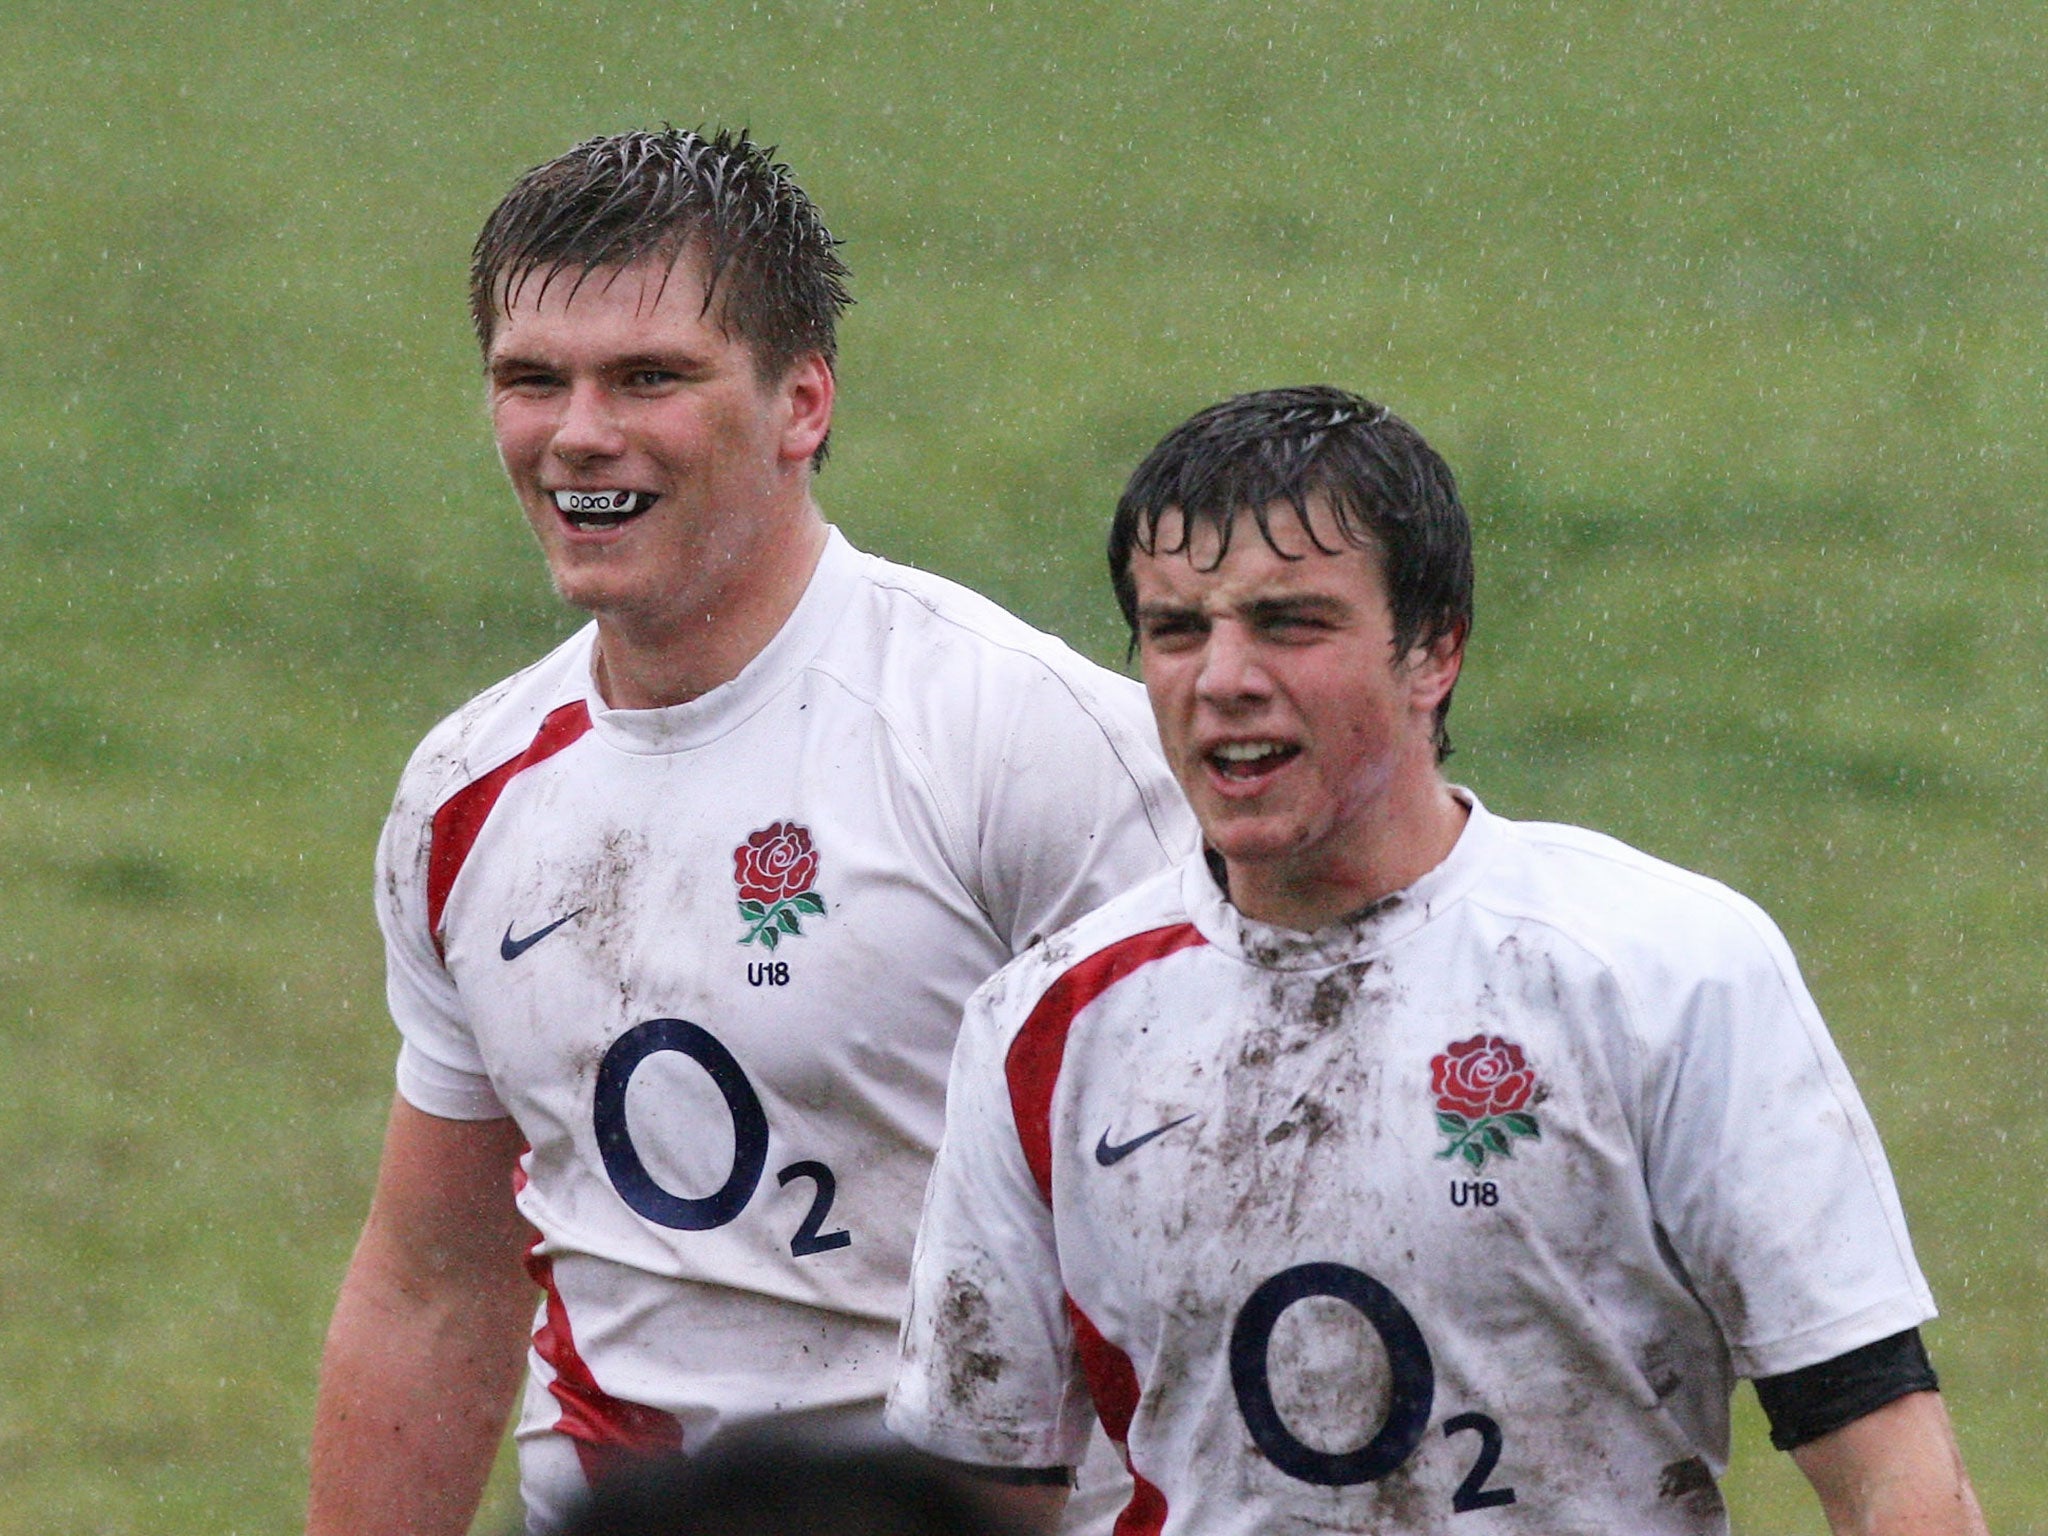 Owen Farrell and George Ford playing for England Under-18s in 2009 in South Africa